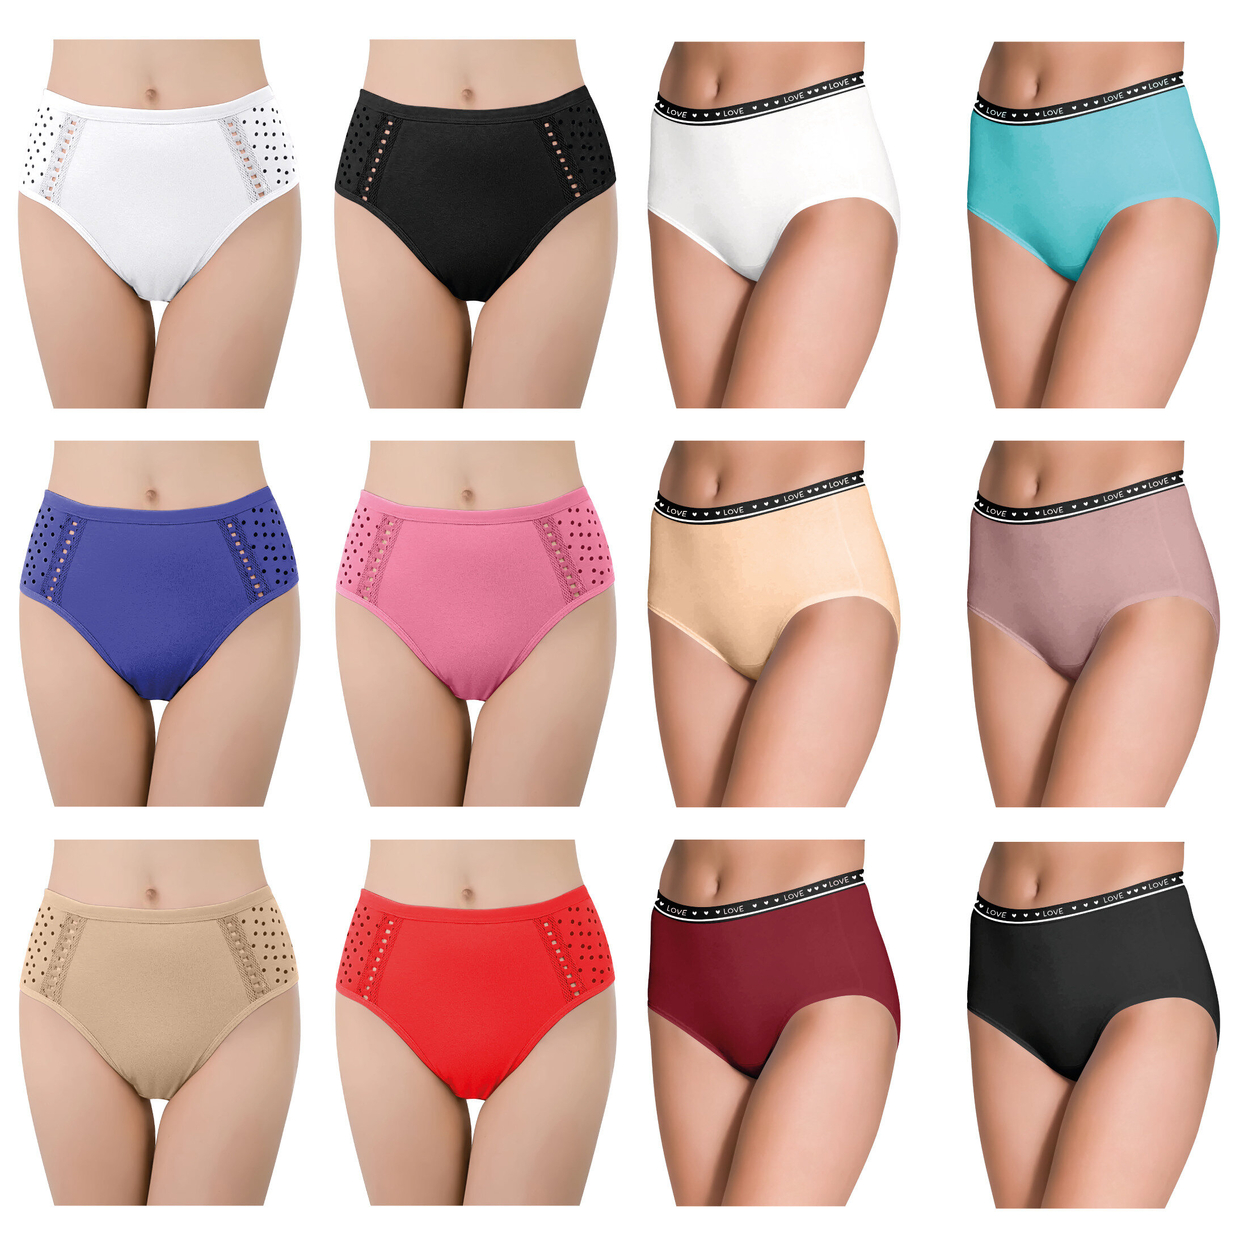 Multi-Pack: Women's Ultra Soft Moisture Wicking Panties Cotton Perfect Fit Underwear (Plus Sizes Available) - 12-Pack, Medium